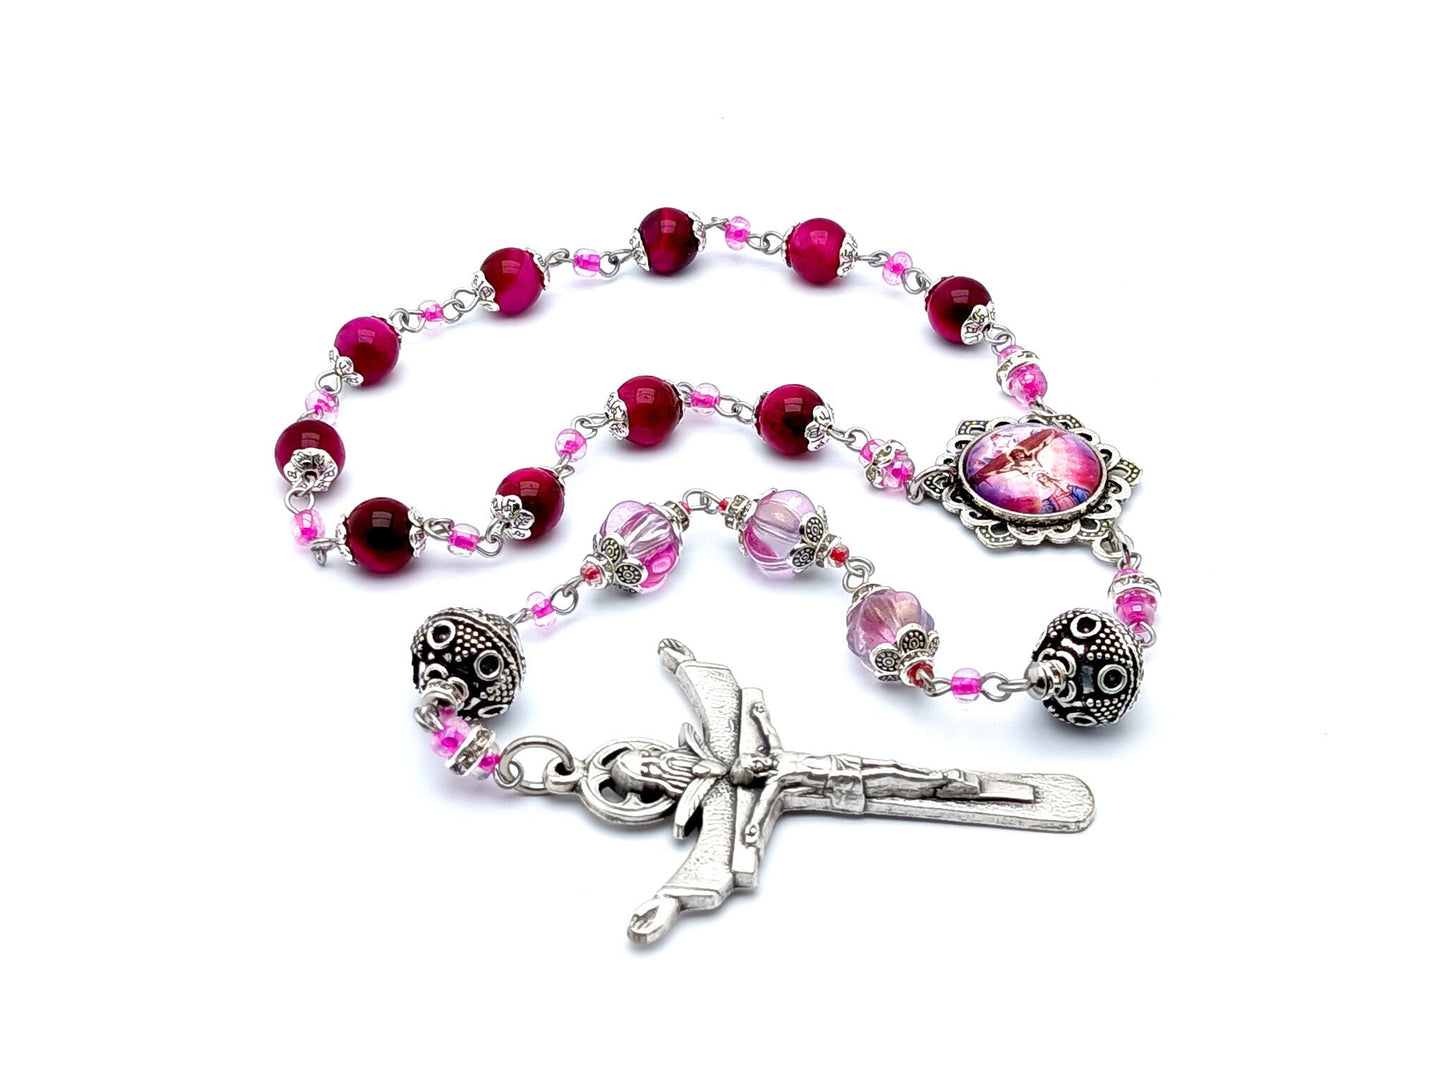 The Crucifixion unique rosary beads pink tigers eye gemstone single decade rosary beads with Holy Trinity crucifix.